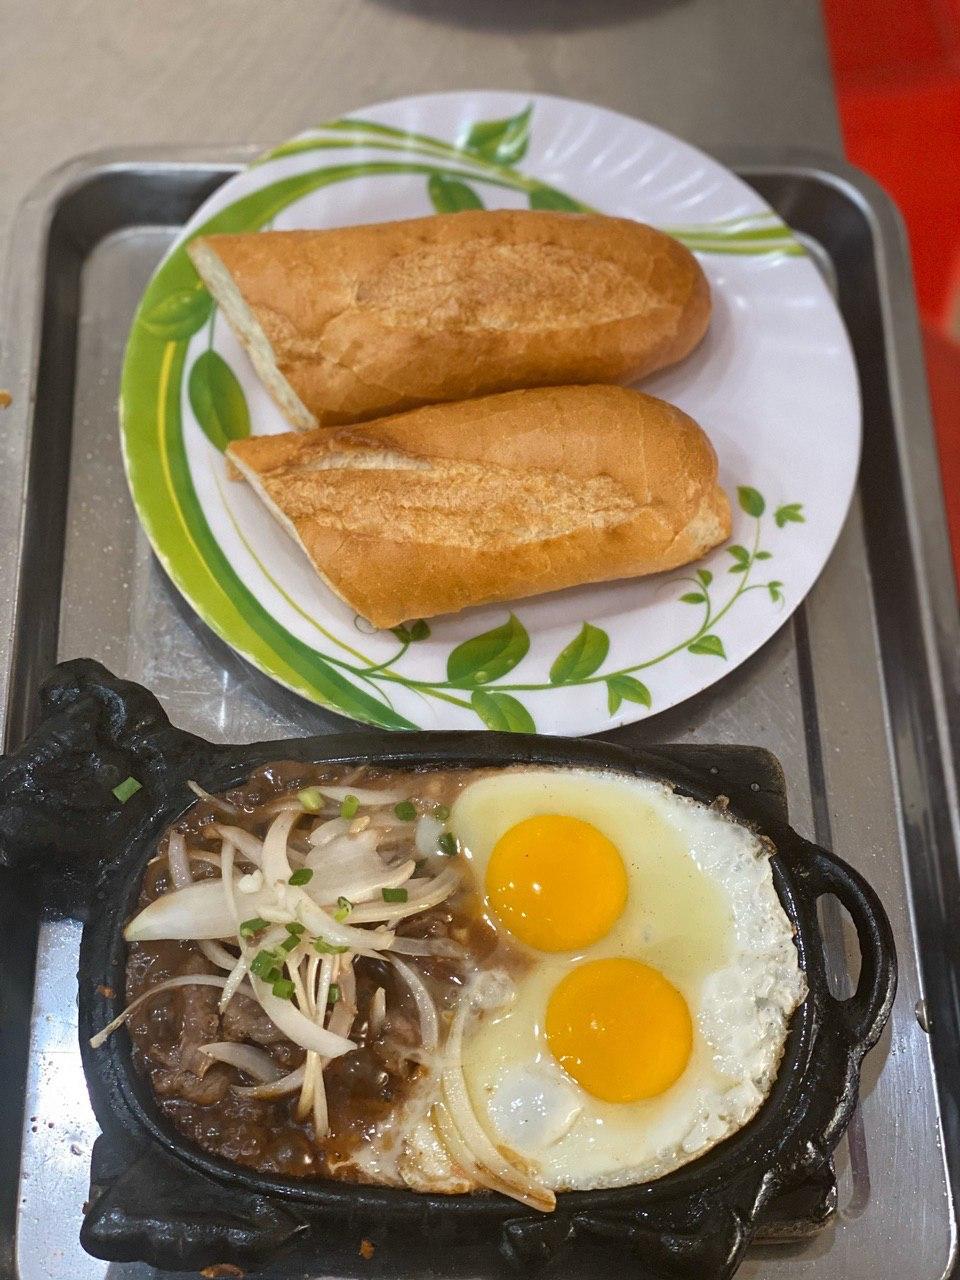 08.Beef on Hot Pan with Bread (Extra Egg)